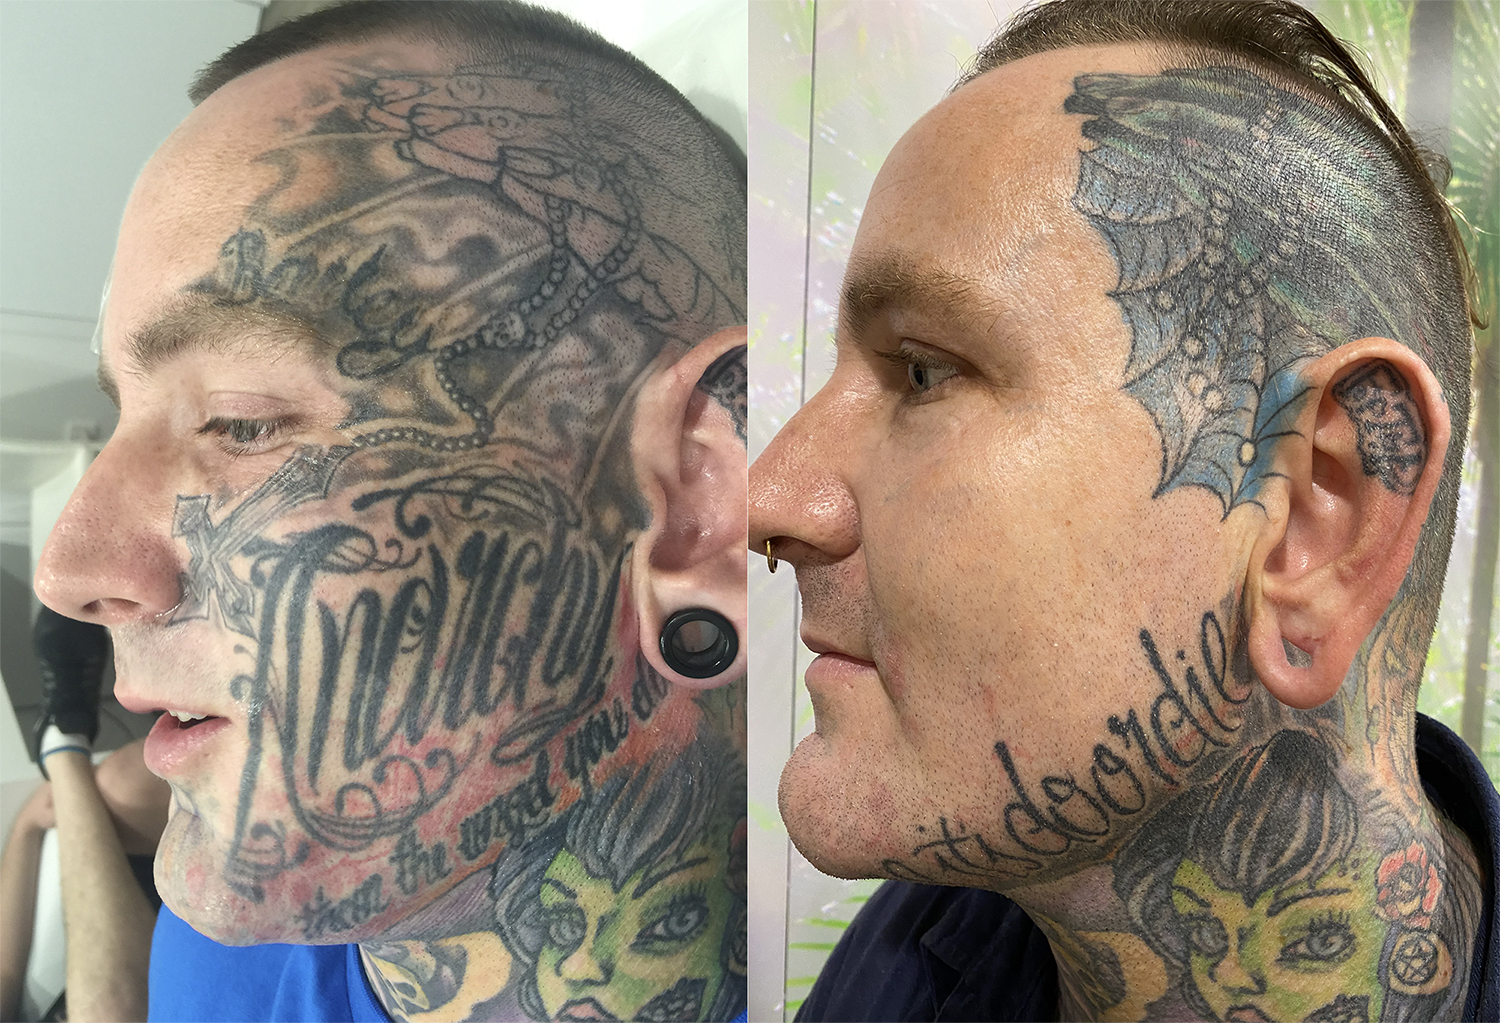 Tattoo Removal: Options and Results | FDA